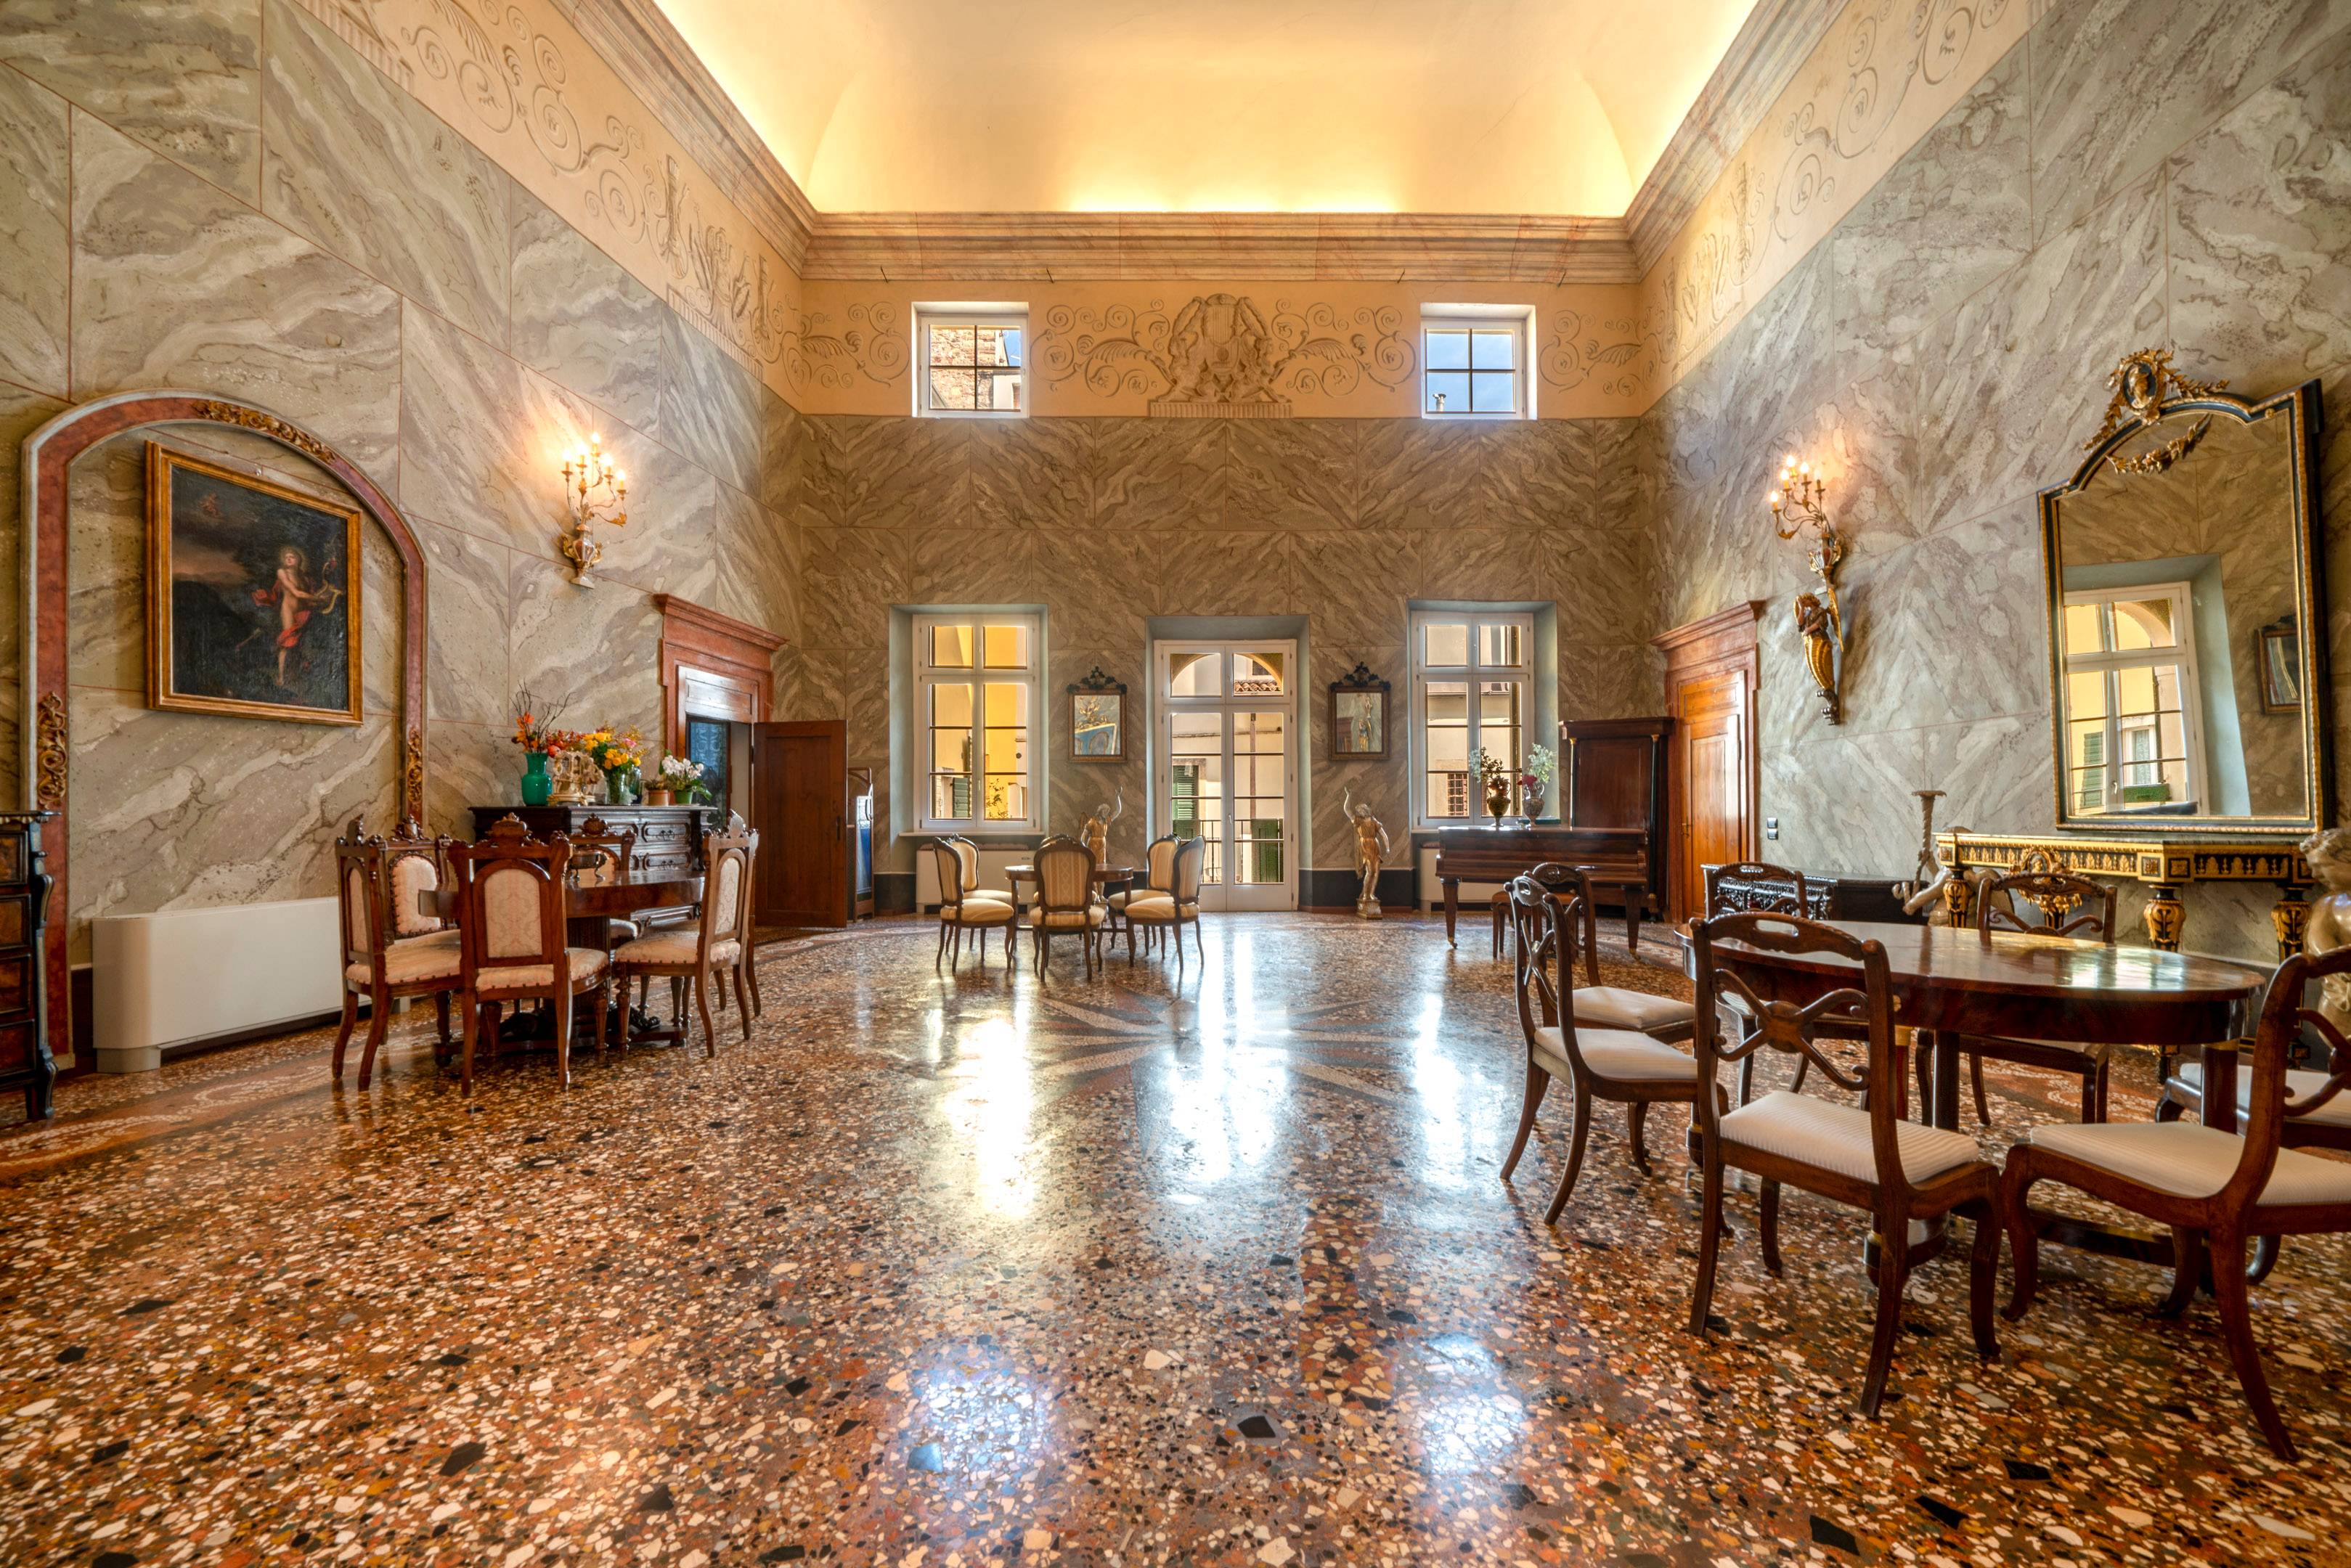 Gorgeous historic property with frescoes in Verona